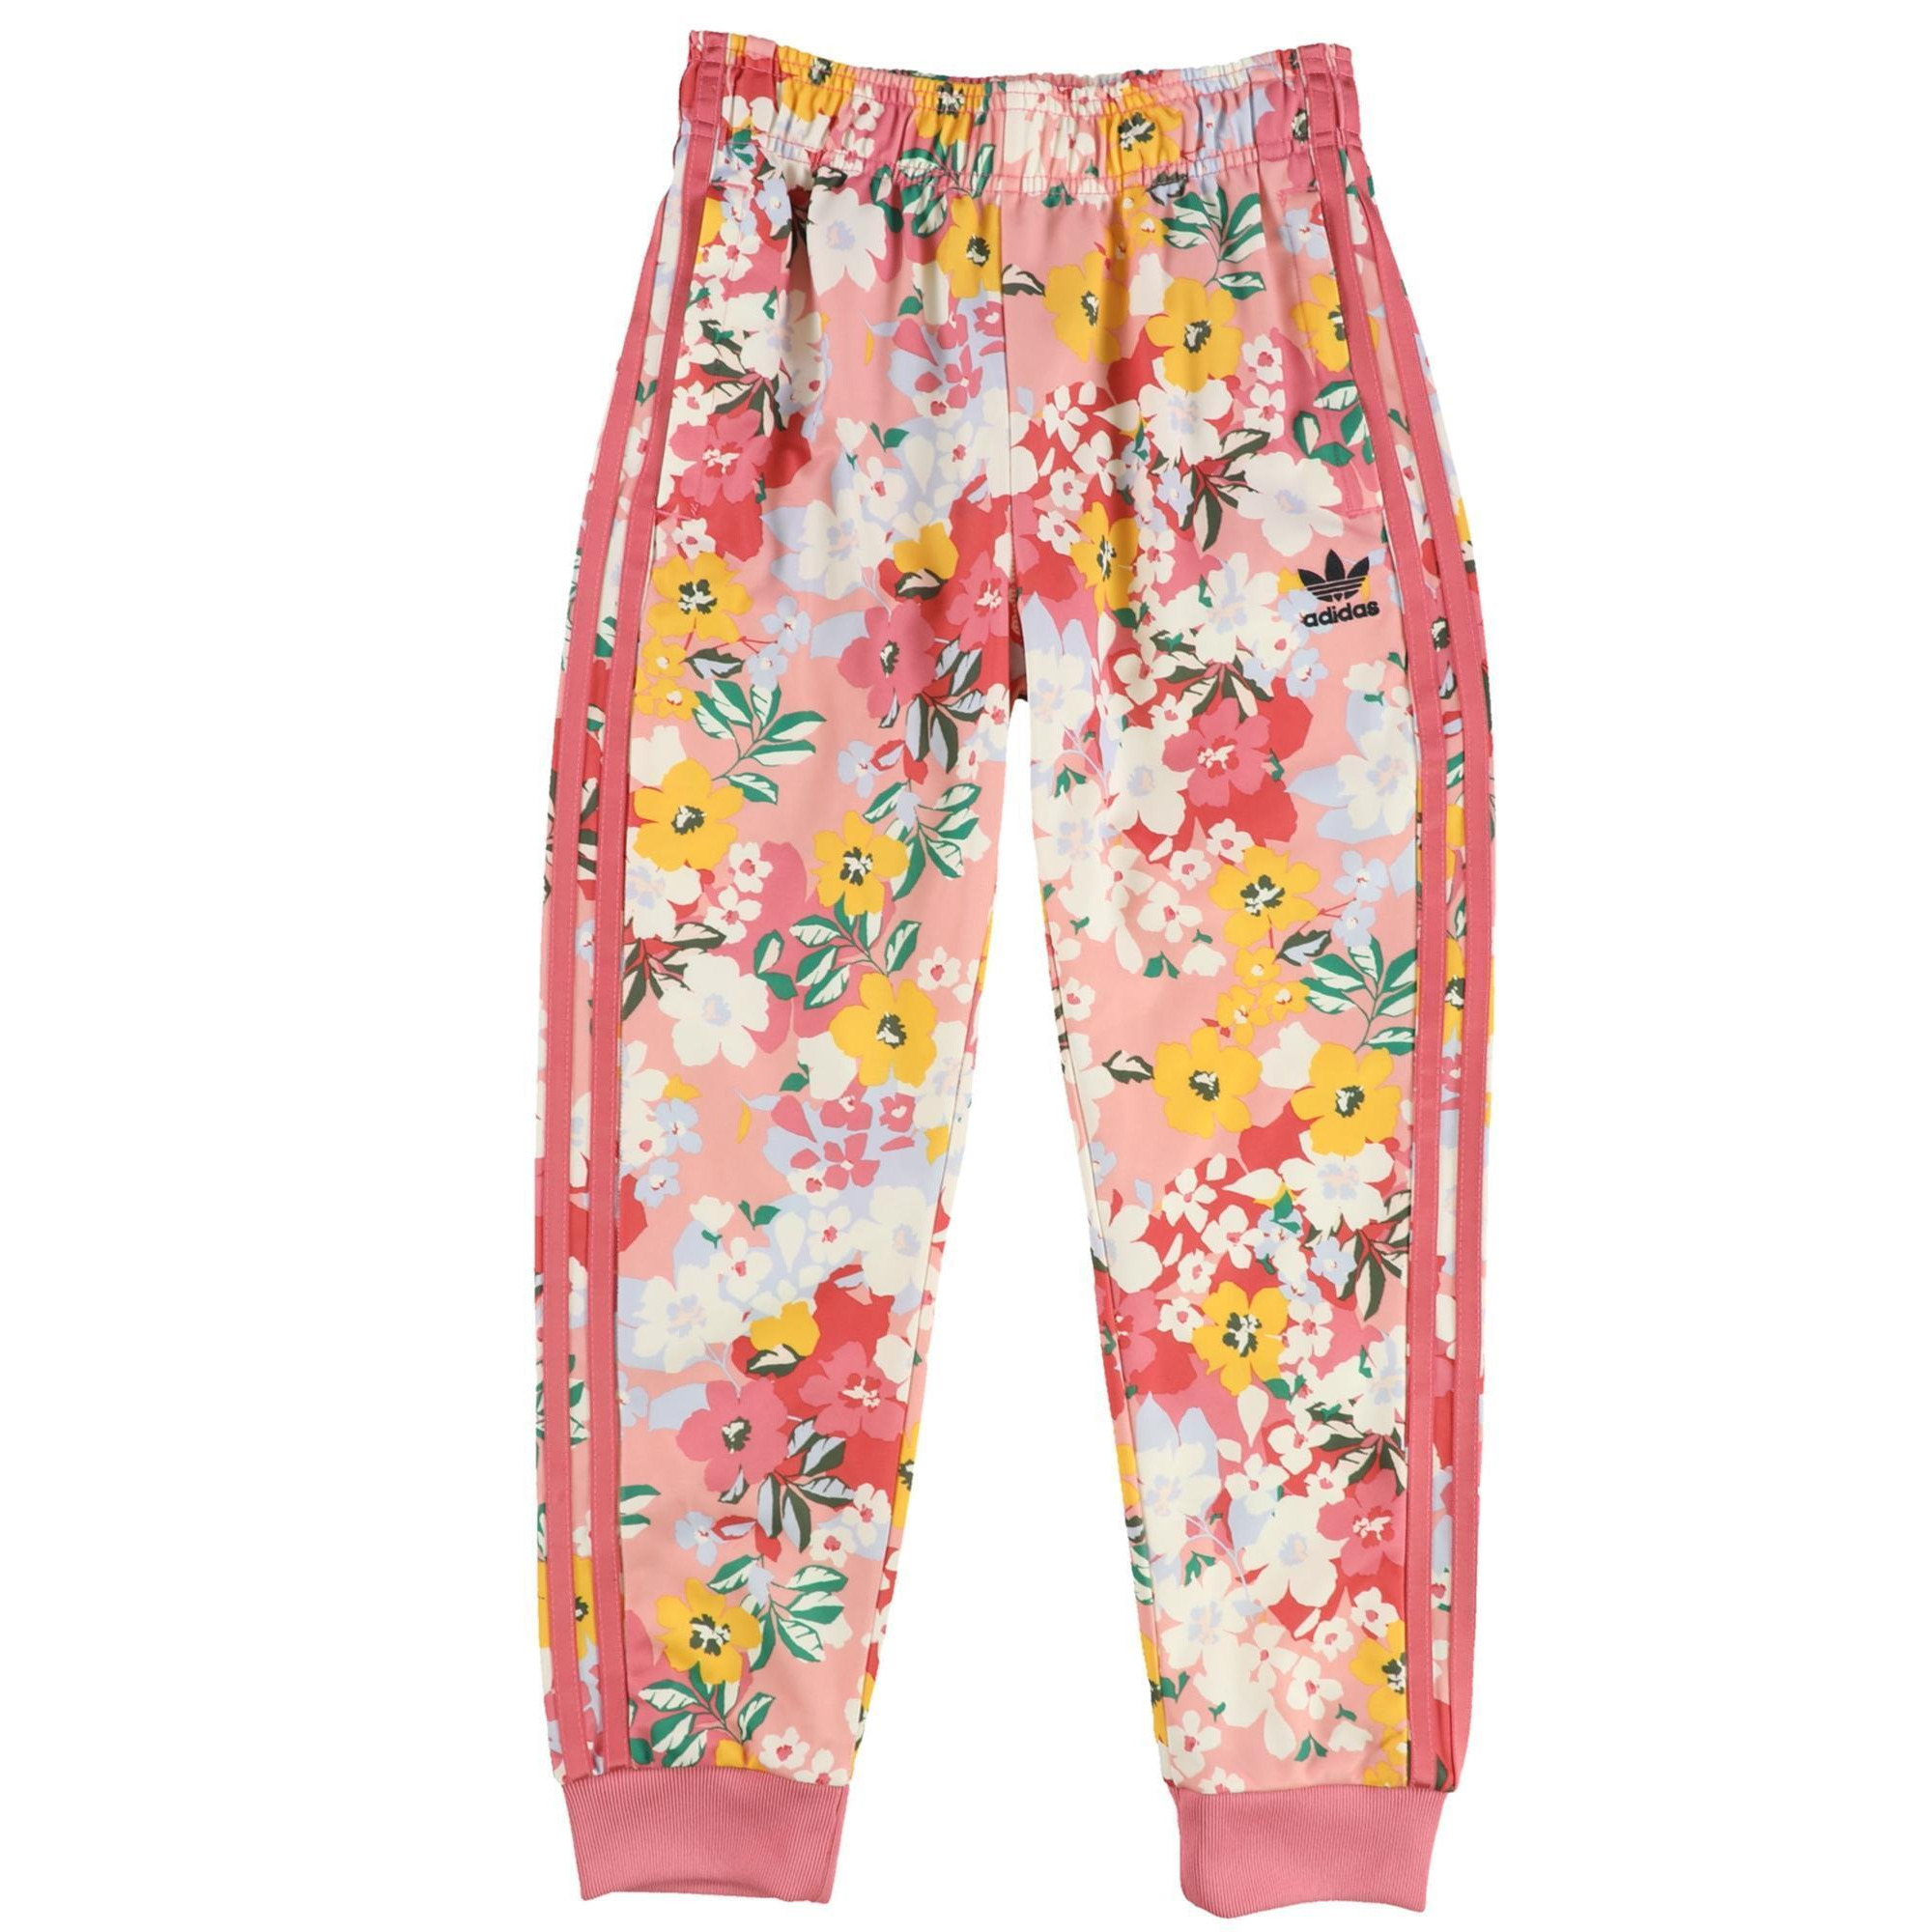 Adidas Girls Floral Athletic Track Pants, Style # GN4210-B alternate image